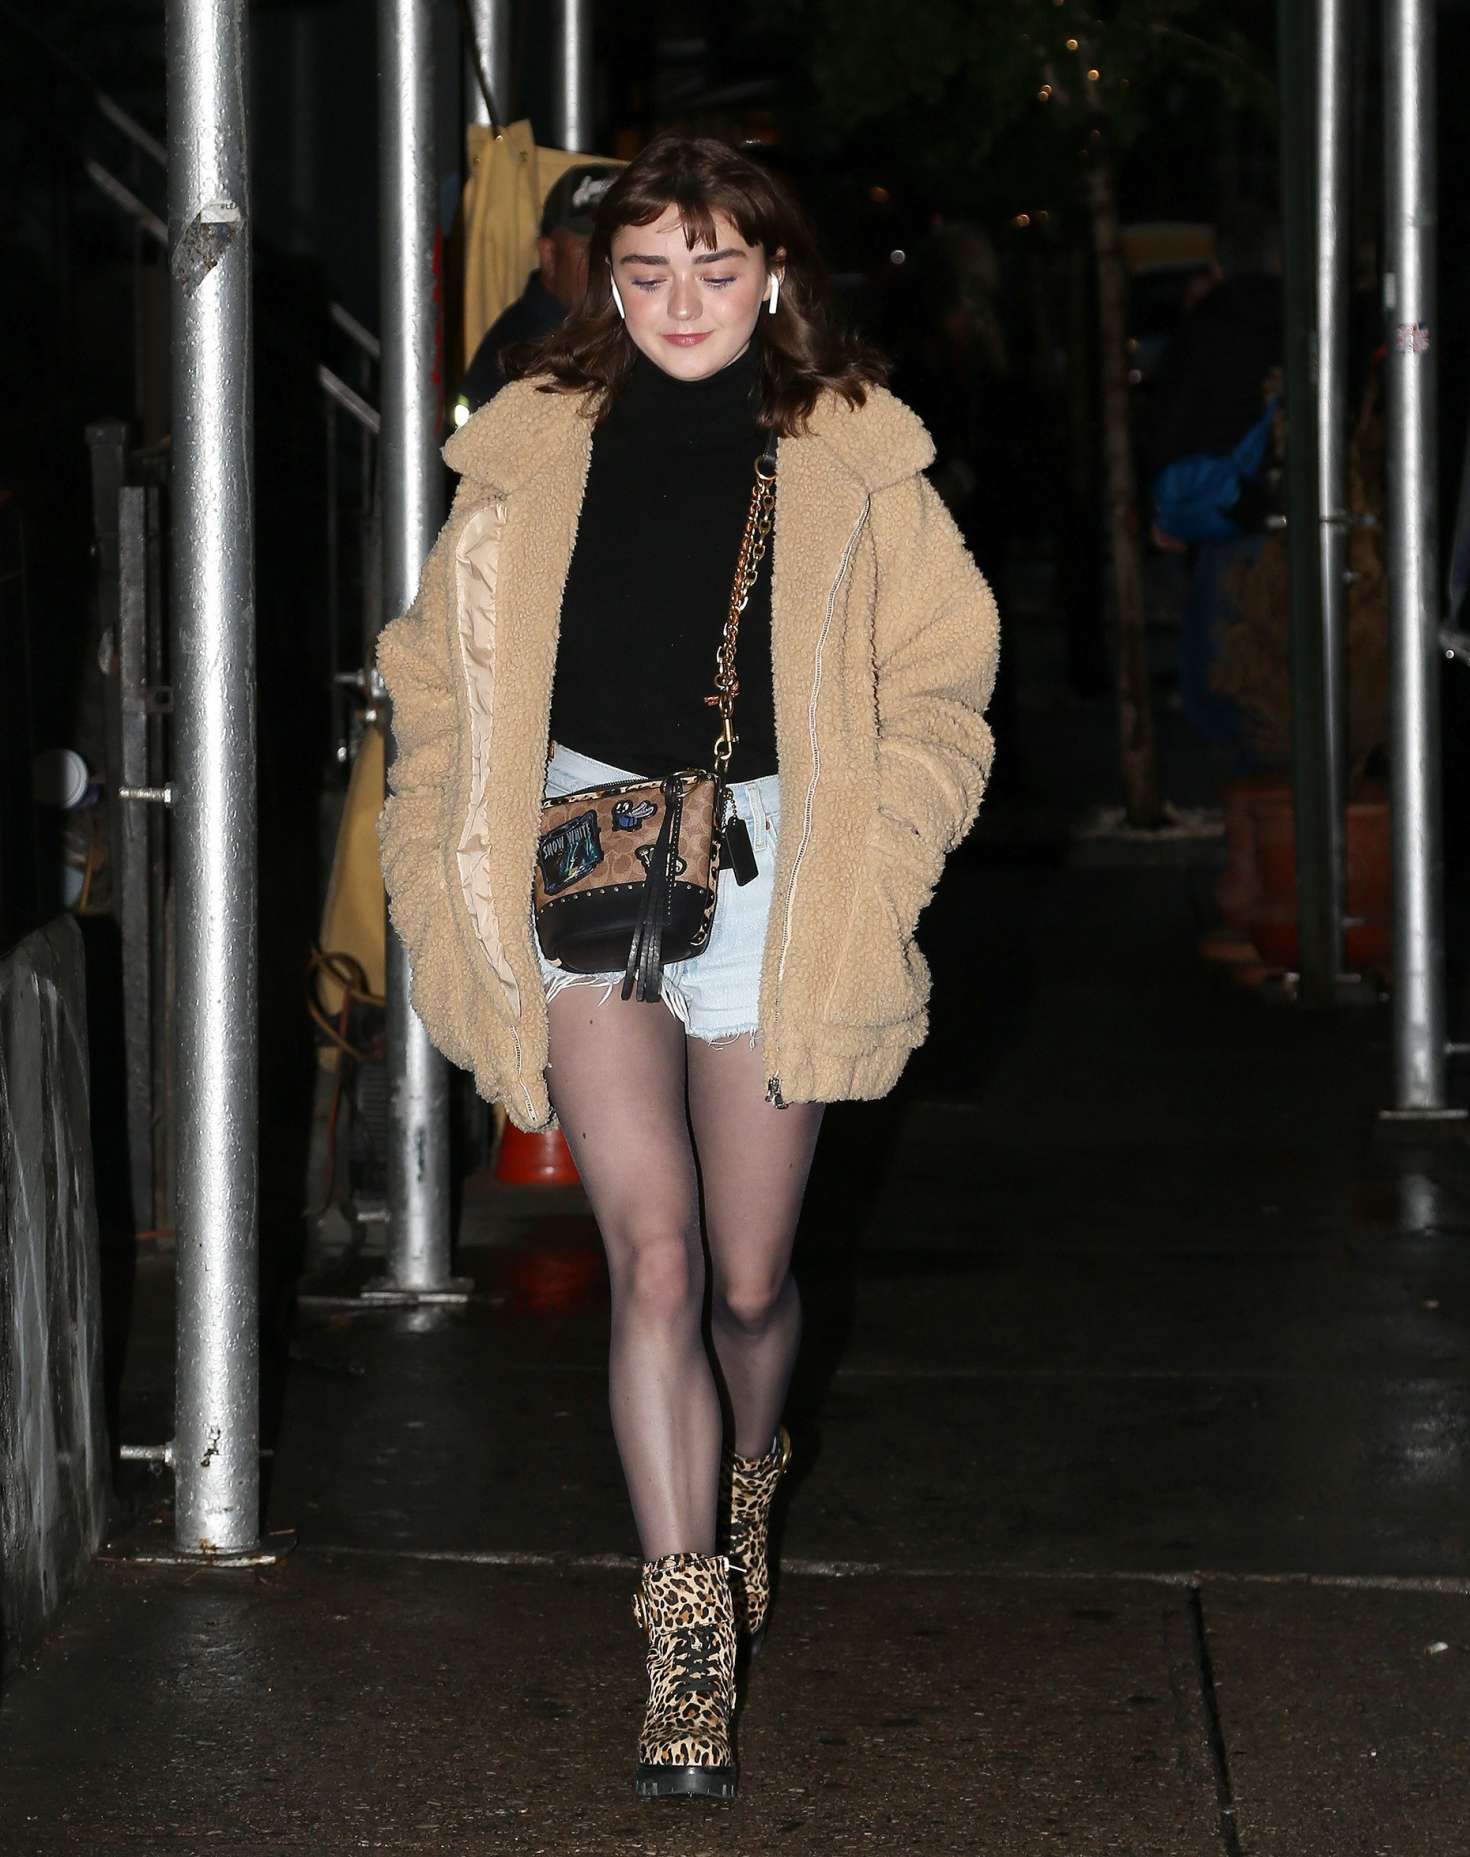 Maisie Williams in Daisy Duke Shorts â€“ Out in New York City